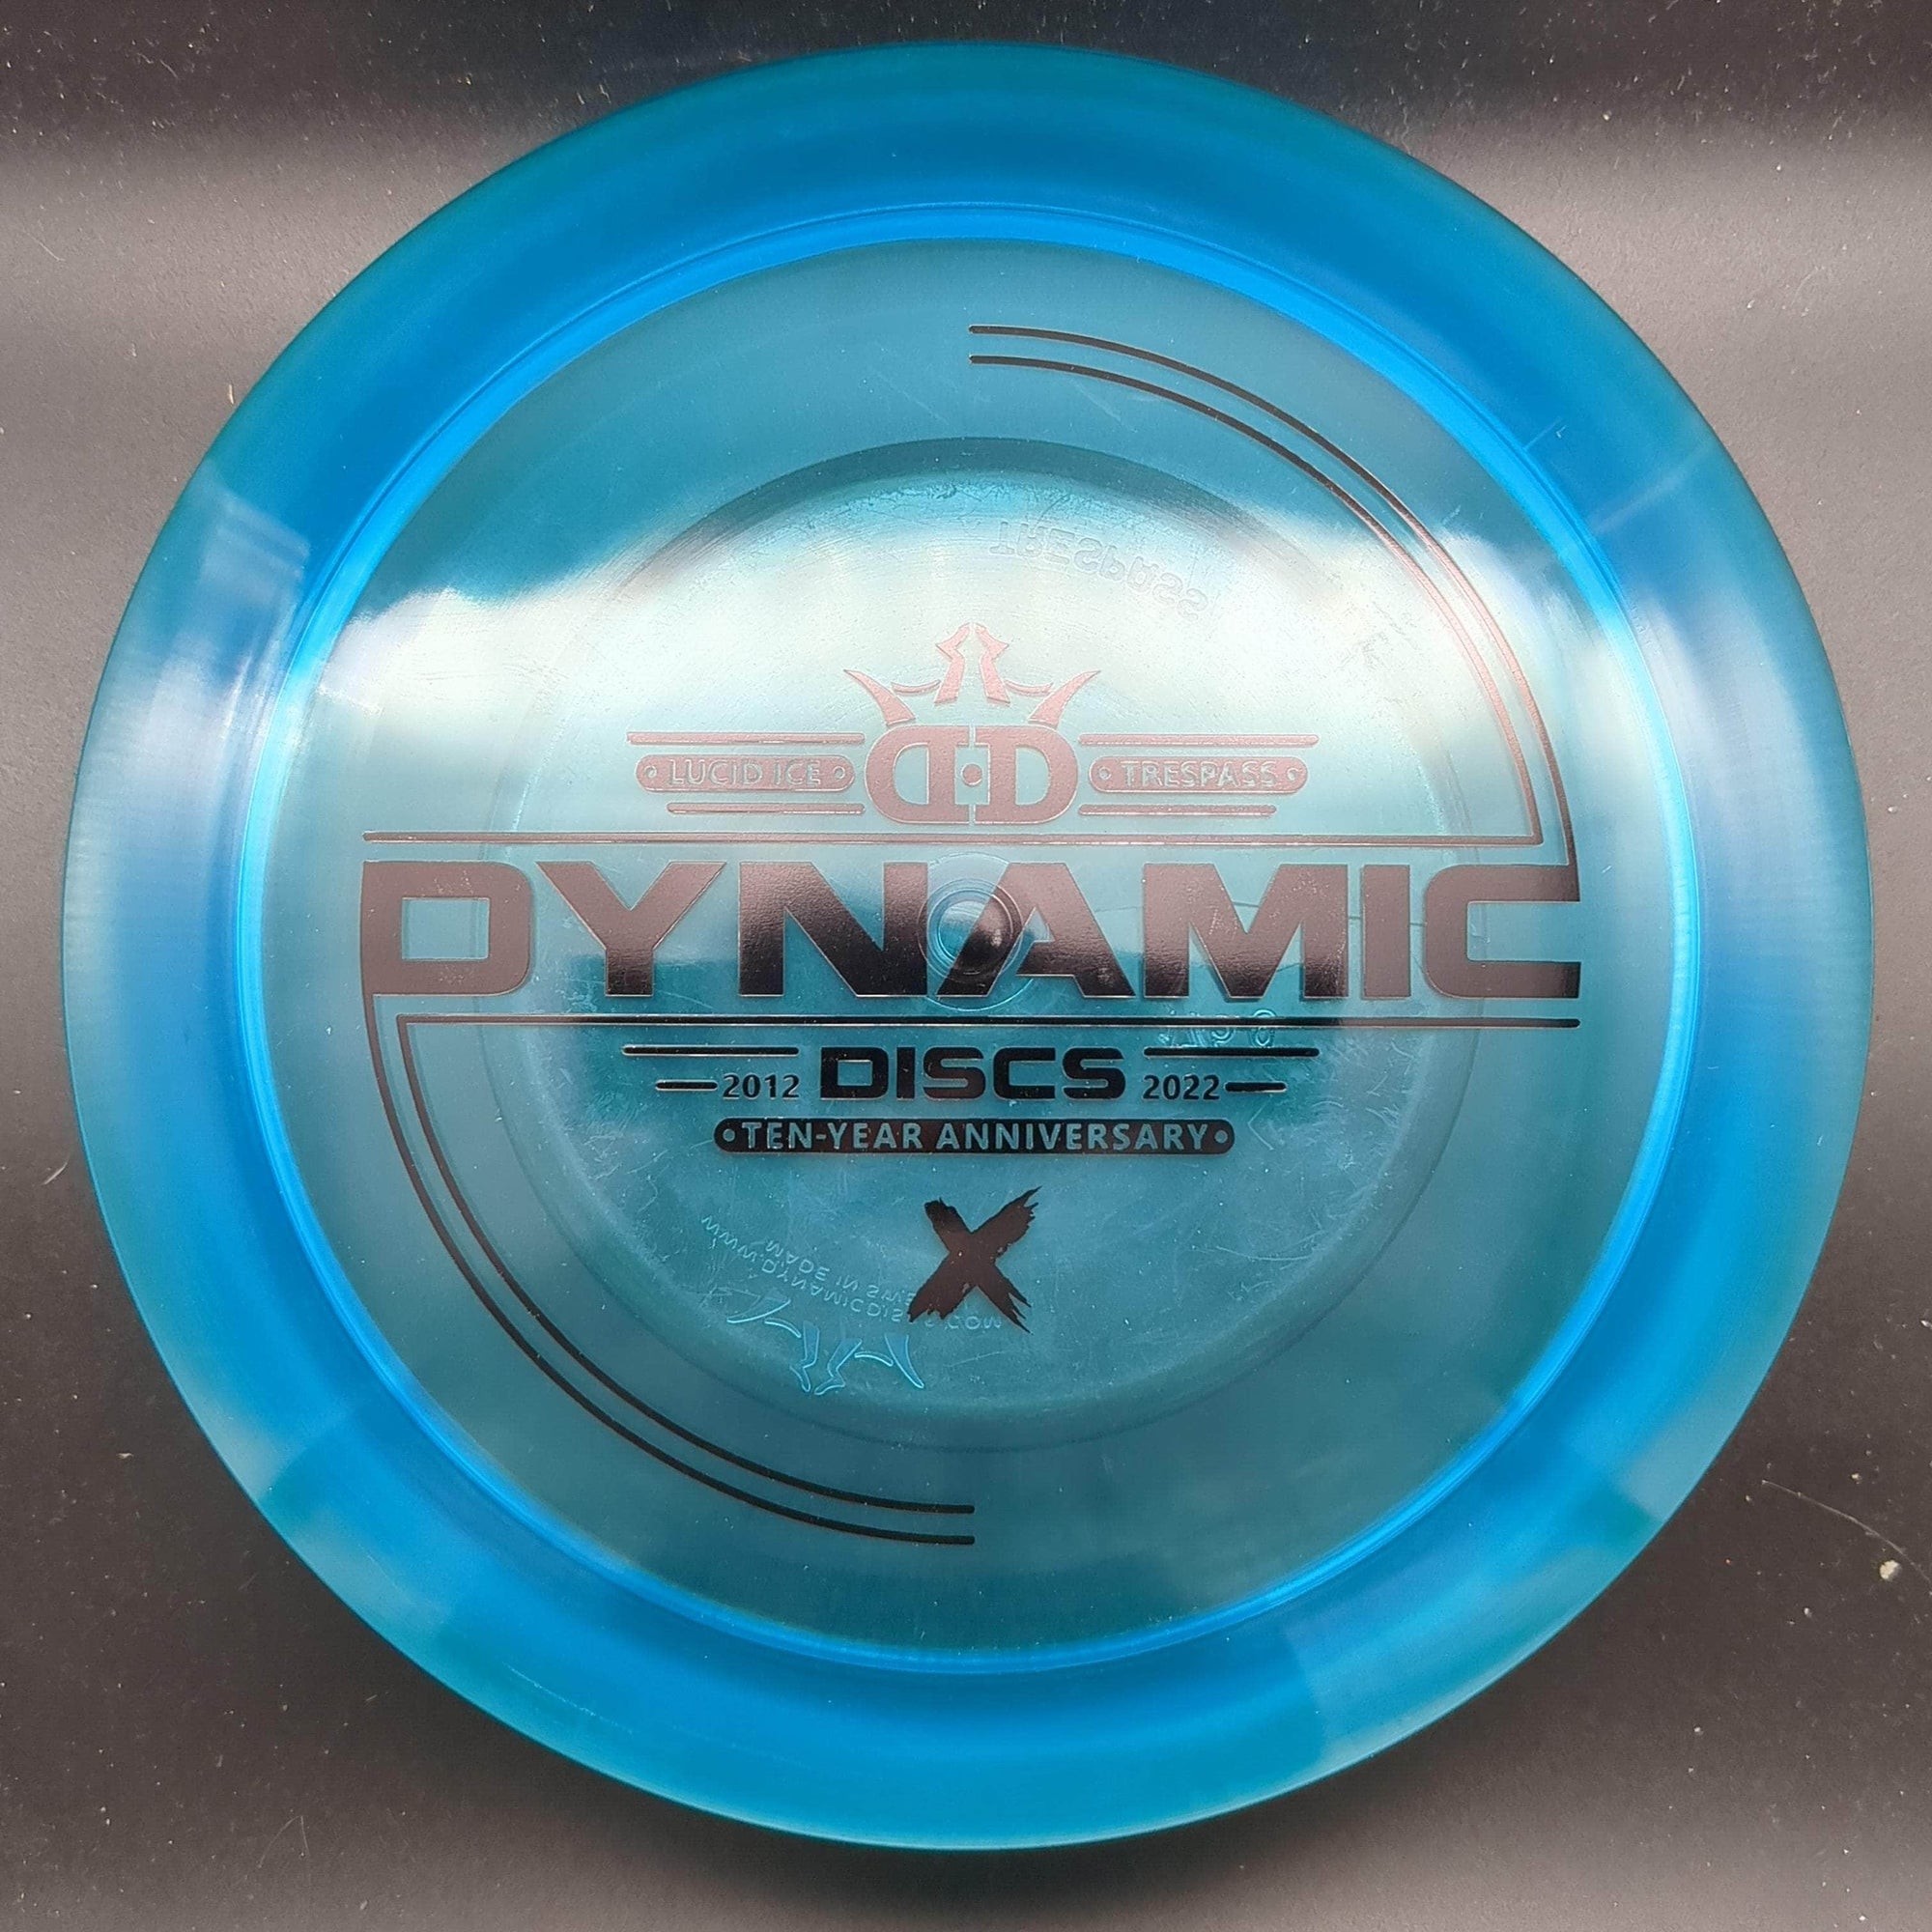 Dynamic Discs Distance Driver Blue Black Stamp 175g Trespass, Lucid Ice, 10 Year Anniversary Edition